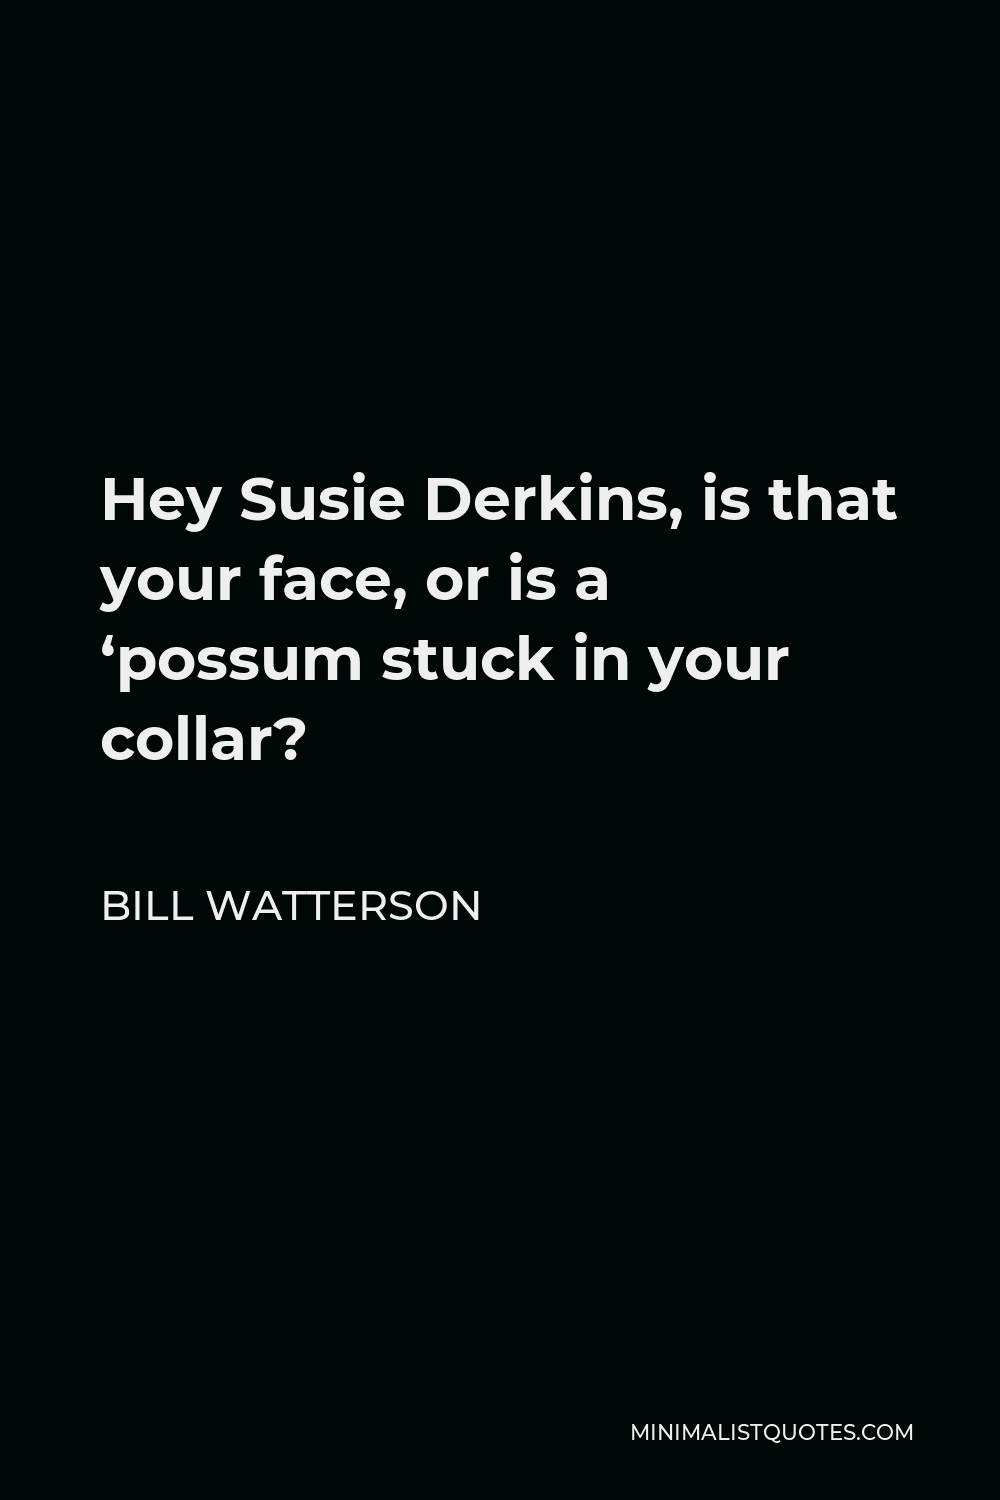 Bill Watterson Quote - Hey Susie Derkins, is that your face, or is a ‘possum stuck in your collar?